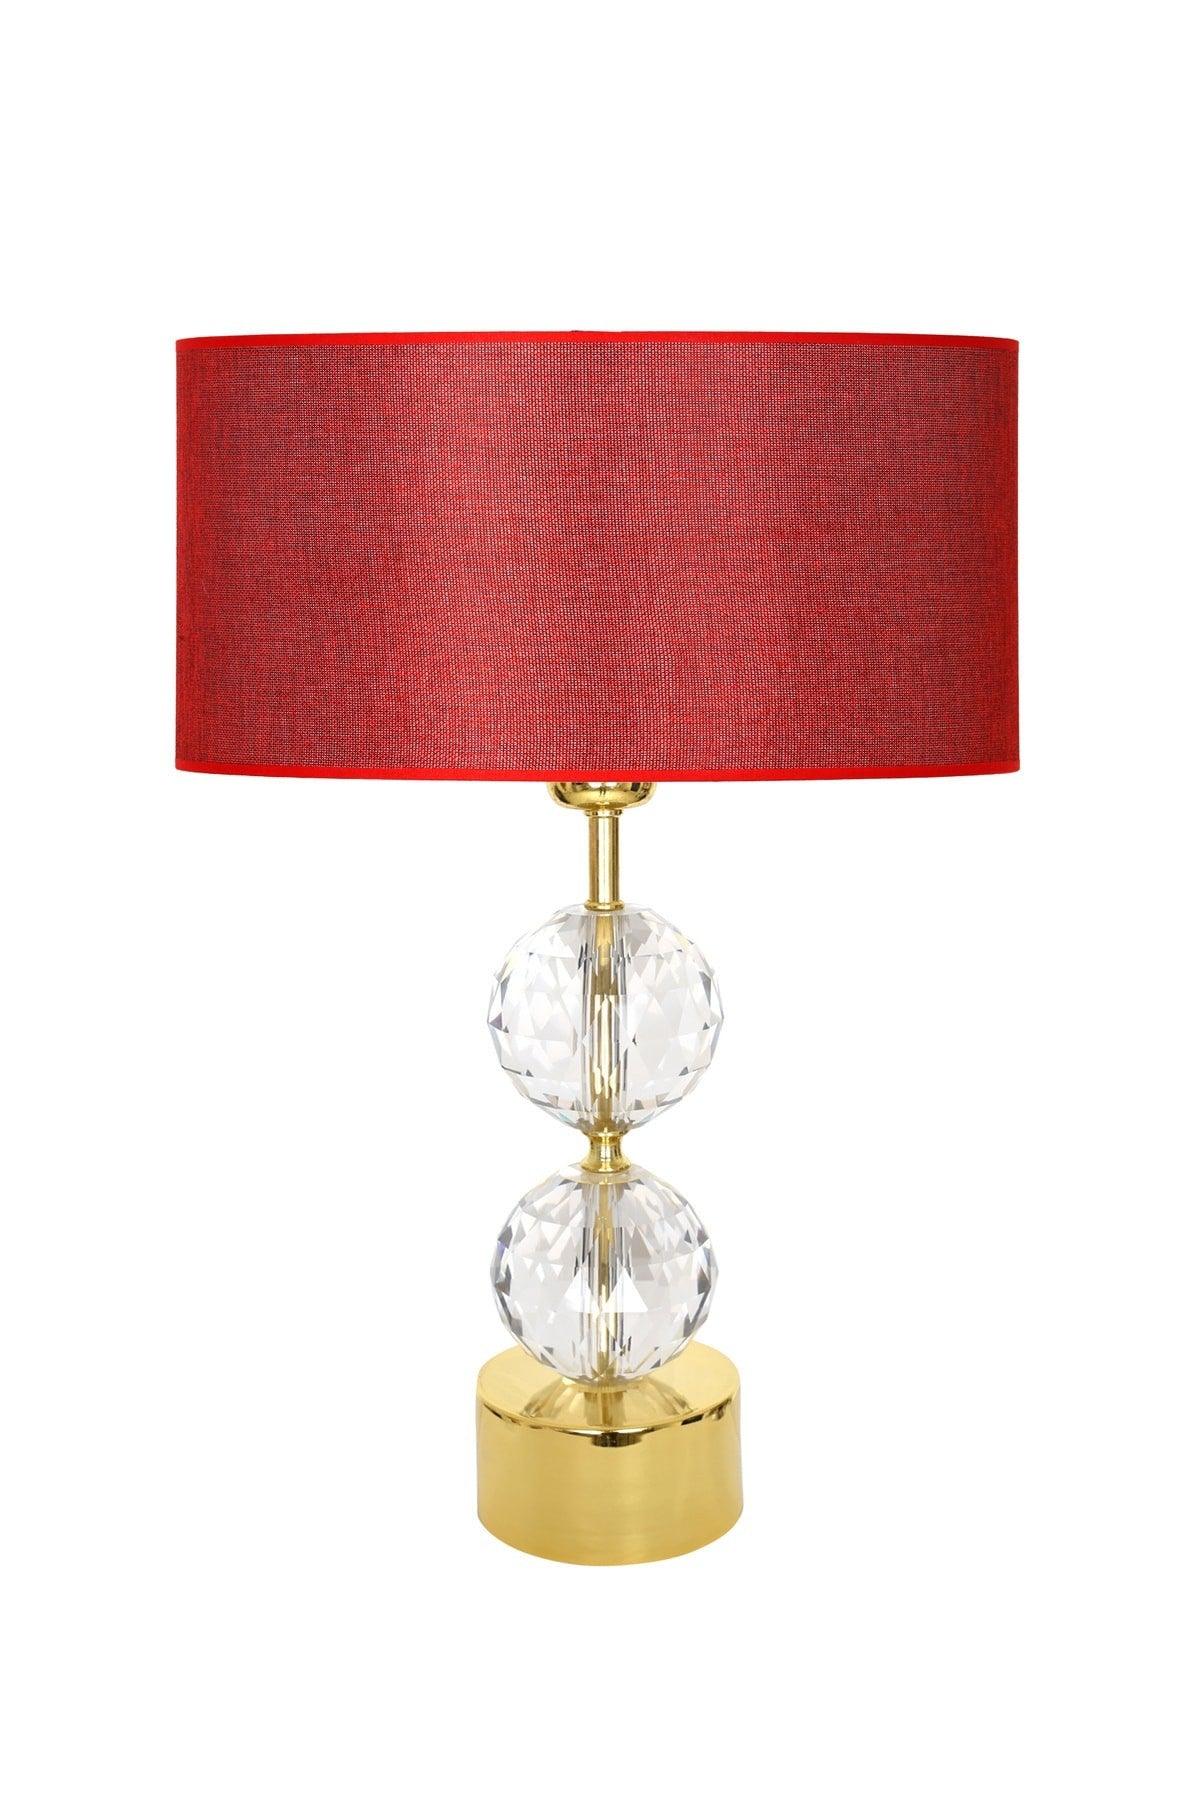 Gld-krs01 Gold Footed Crystal Lampshade - Claret Red - Swordslife